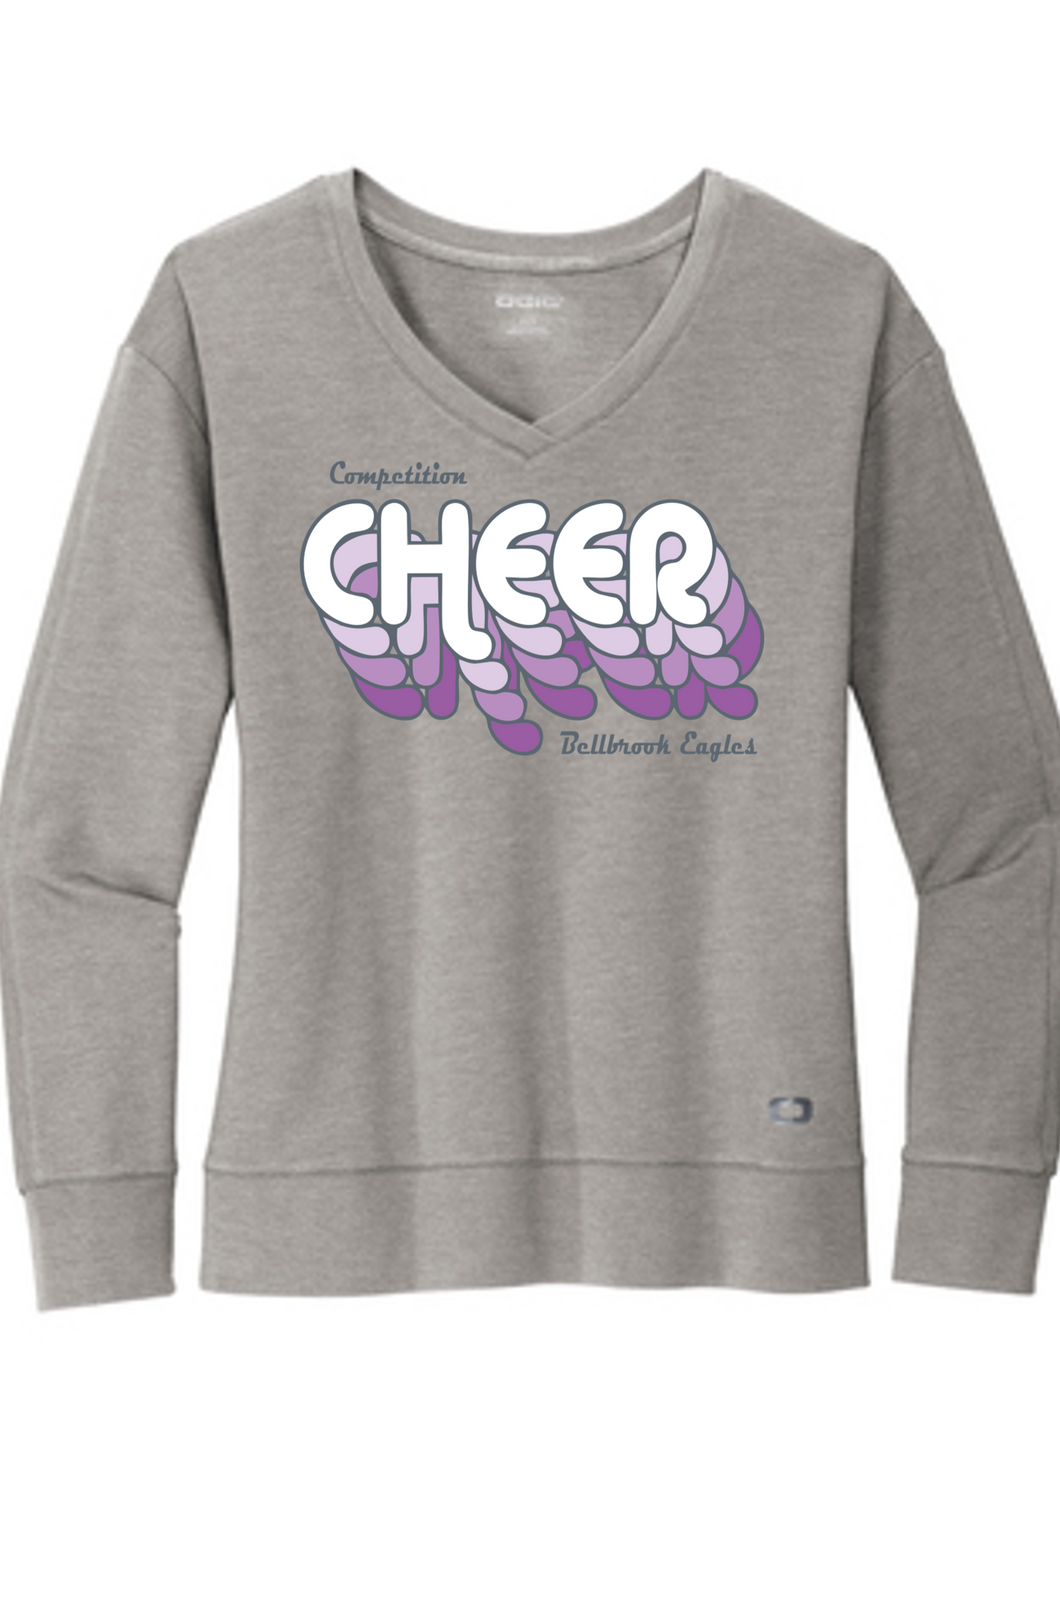 Competition CHEER CHEER CHEER Ladies V-Neck Pullover